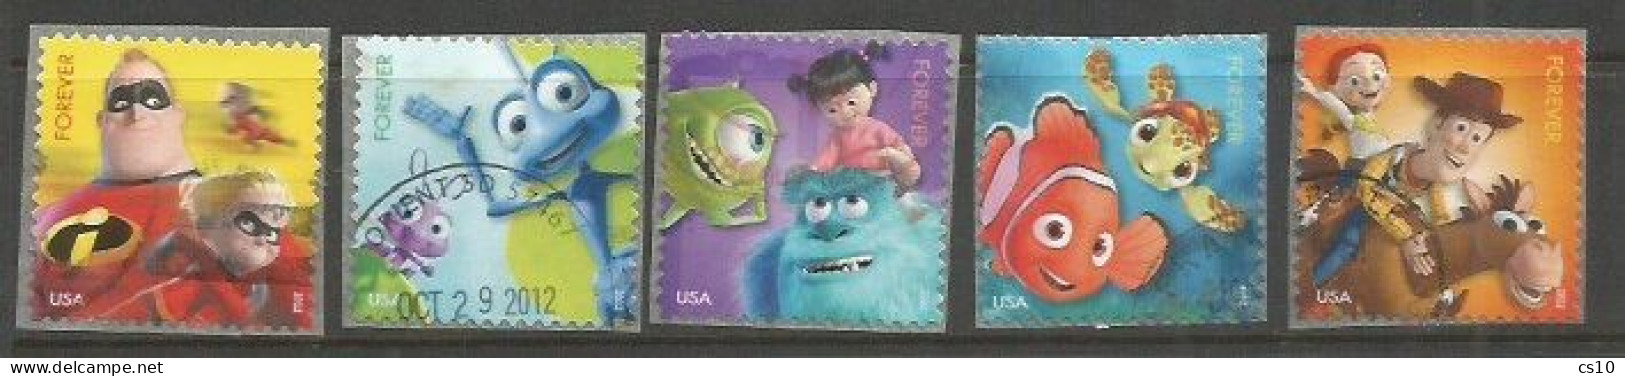 USA 2012 Disney Pixar "Mail A Smile" Sc.# 4677/81 Cpl 5v Set VFU : Bug's Life Incredibles Nemo Toy Story Monsters - Collections